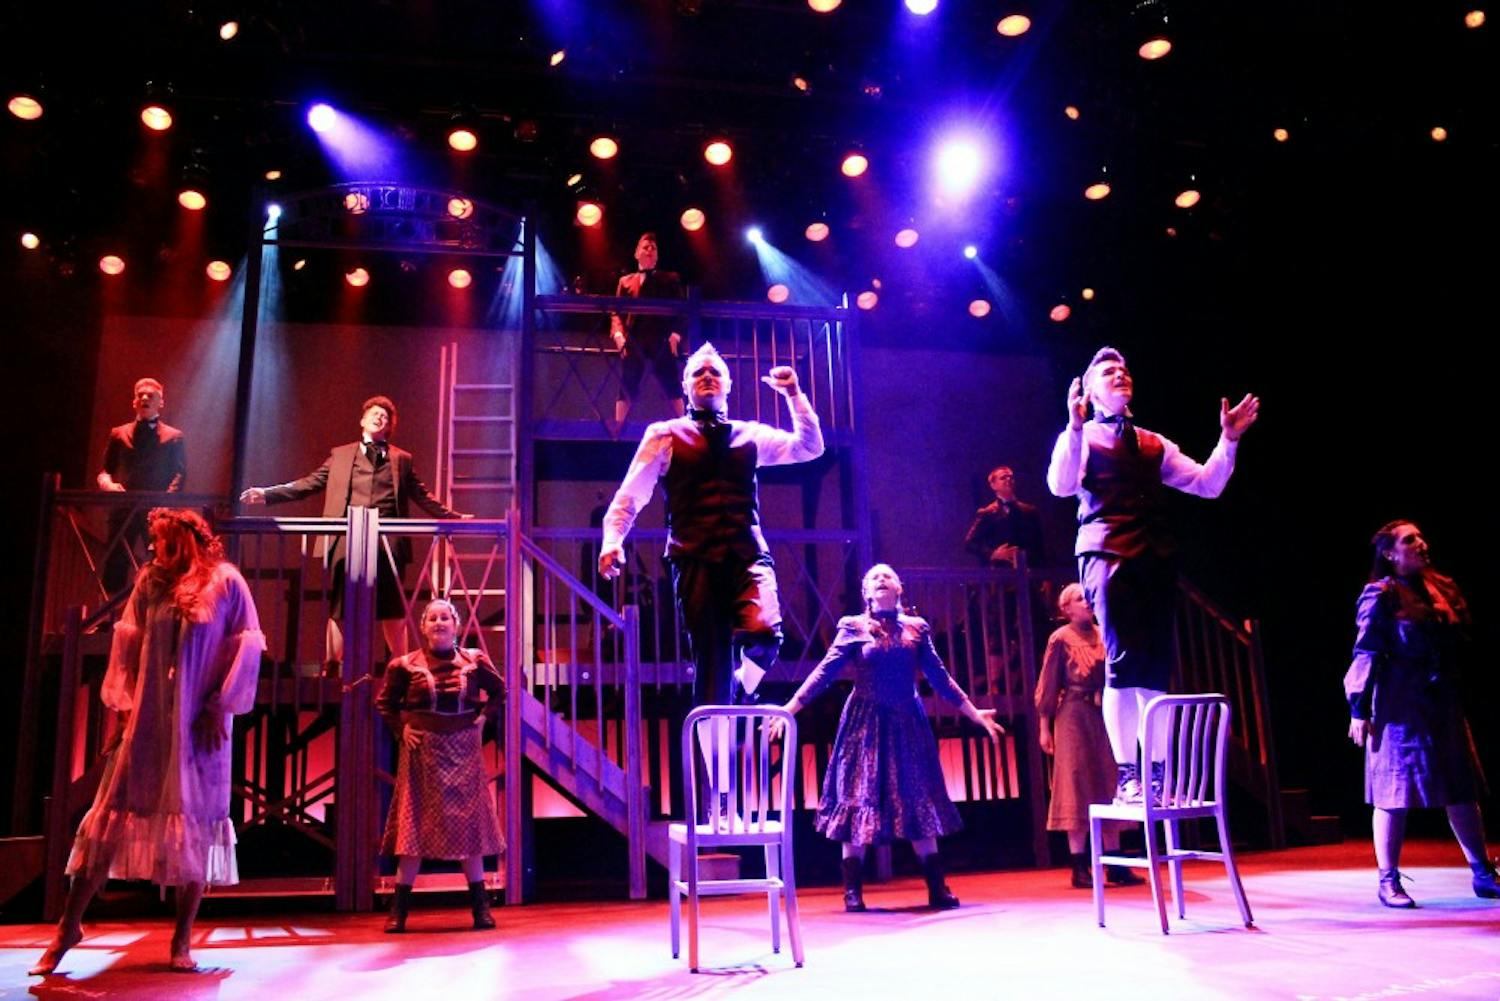 The cast of MusicalFare’s “Spring Awakening” performs “Totally F*cked” at Shea’s 710 Theatre. “Spring Awakening” is a controversial rock musical that explores teen sexuality in 19th century Germany.